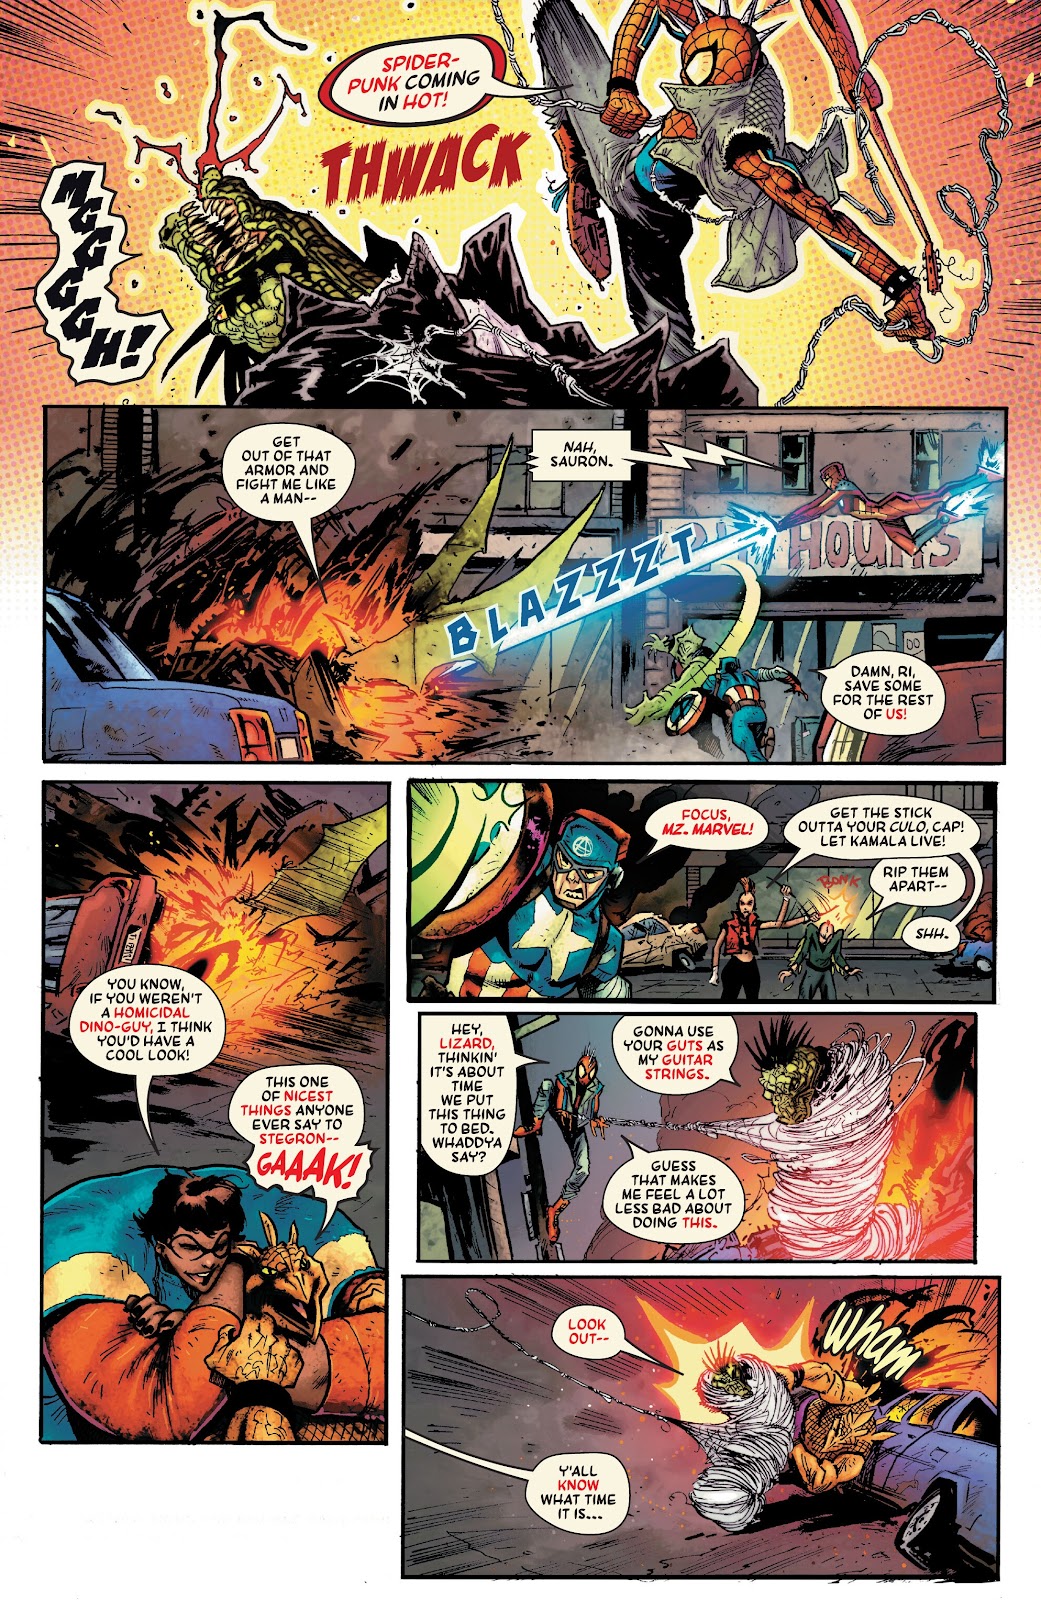 Spider-Punk: Arms Race issue 1 - Page 5